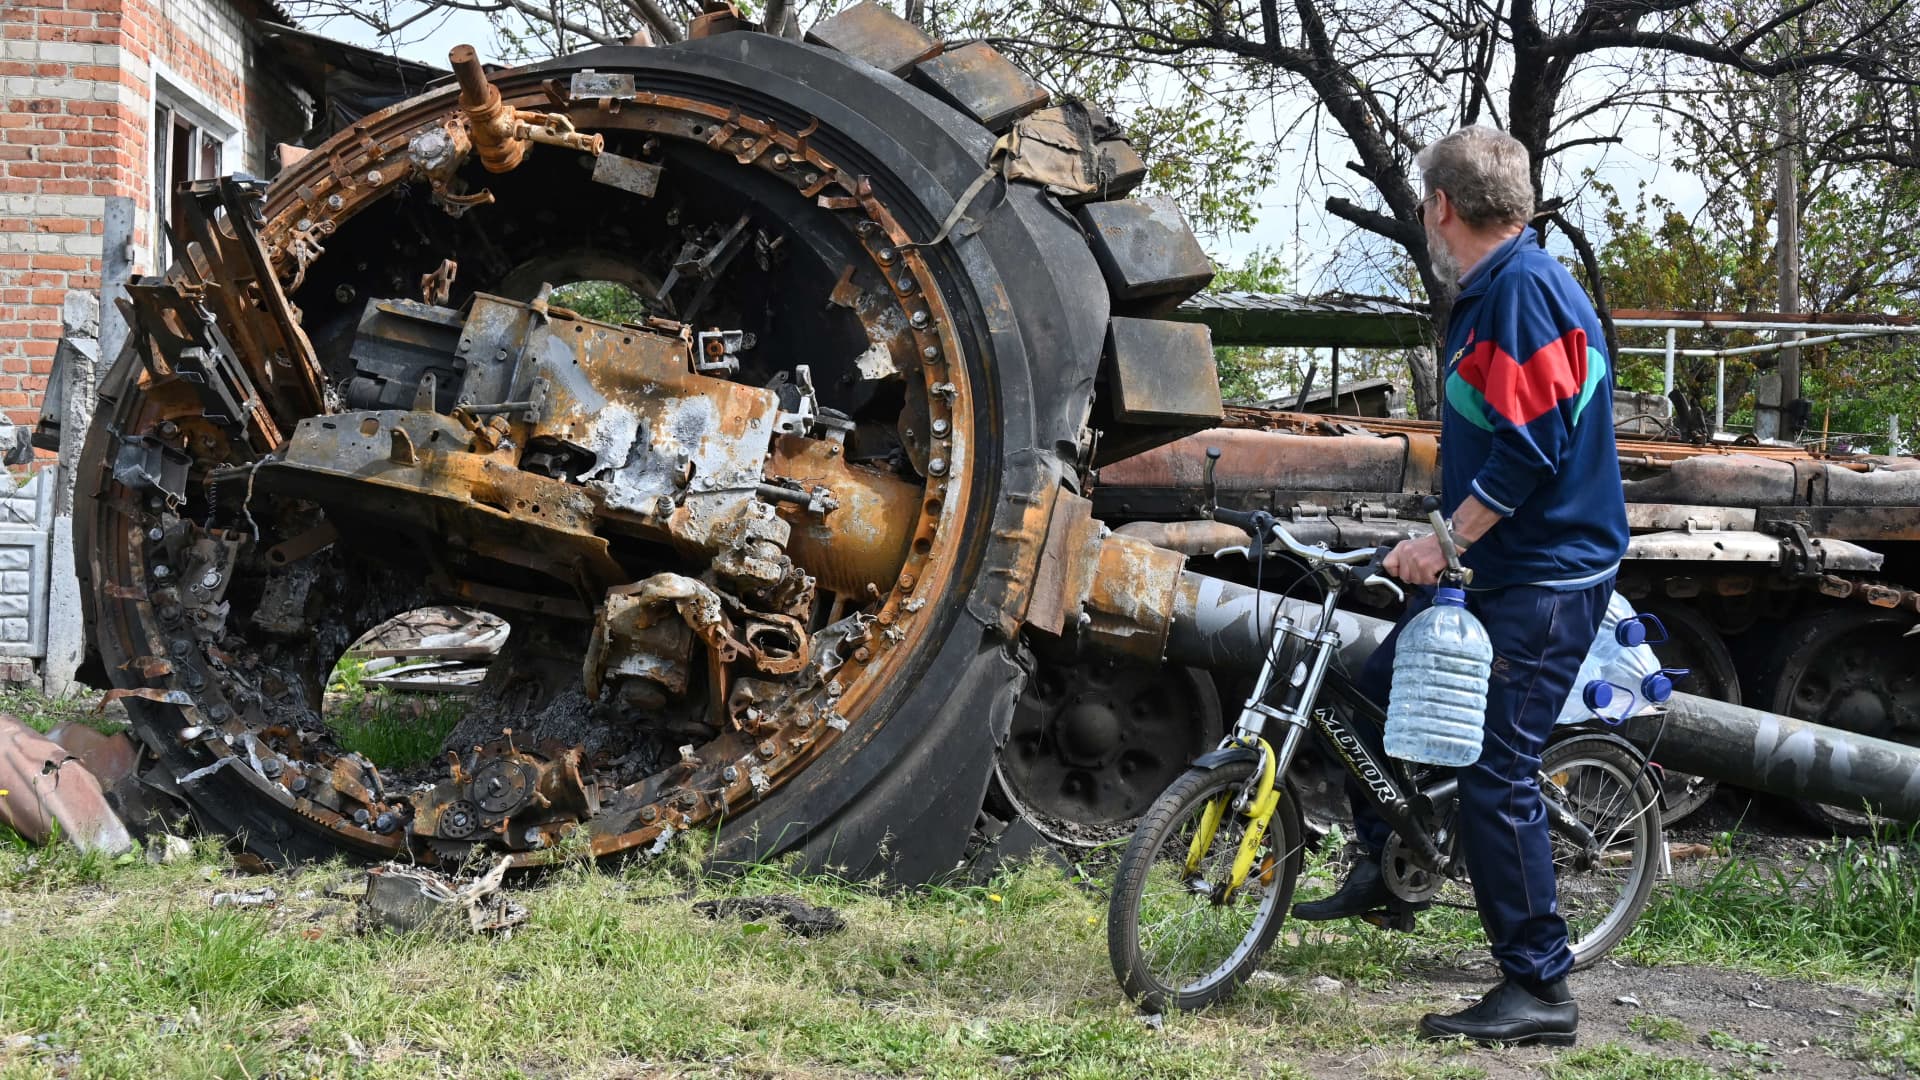 A local resident looks at a destroyed Russian tank next to a residential house in the village of Mala Rogan, east of Kharkiv, on May 15, 2022, amid Russian invasion of Ukraine.